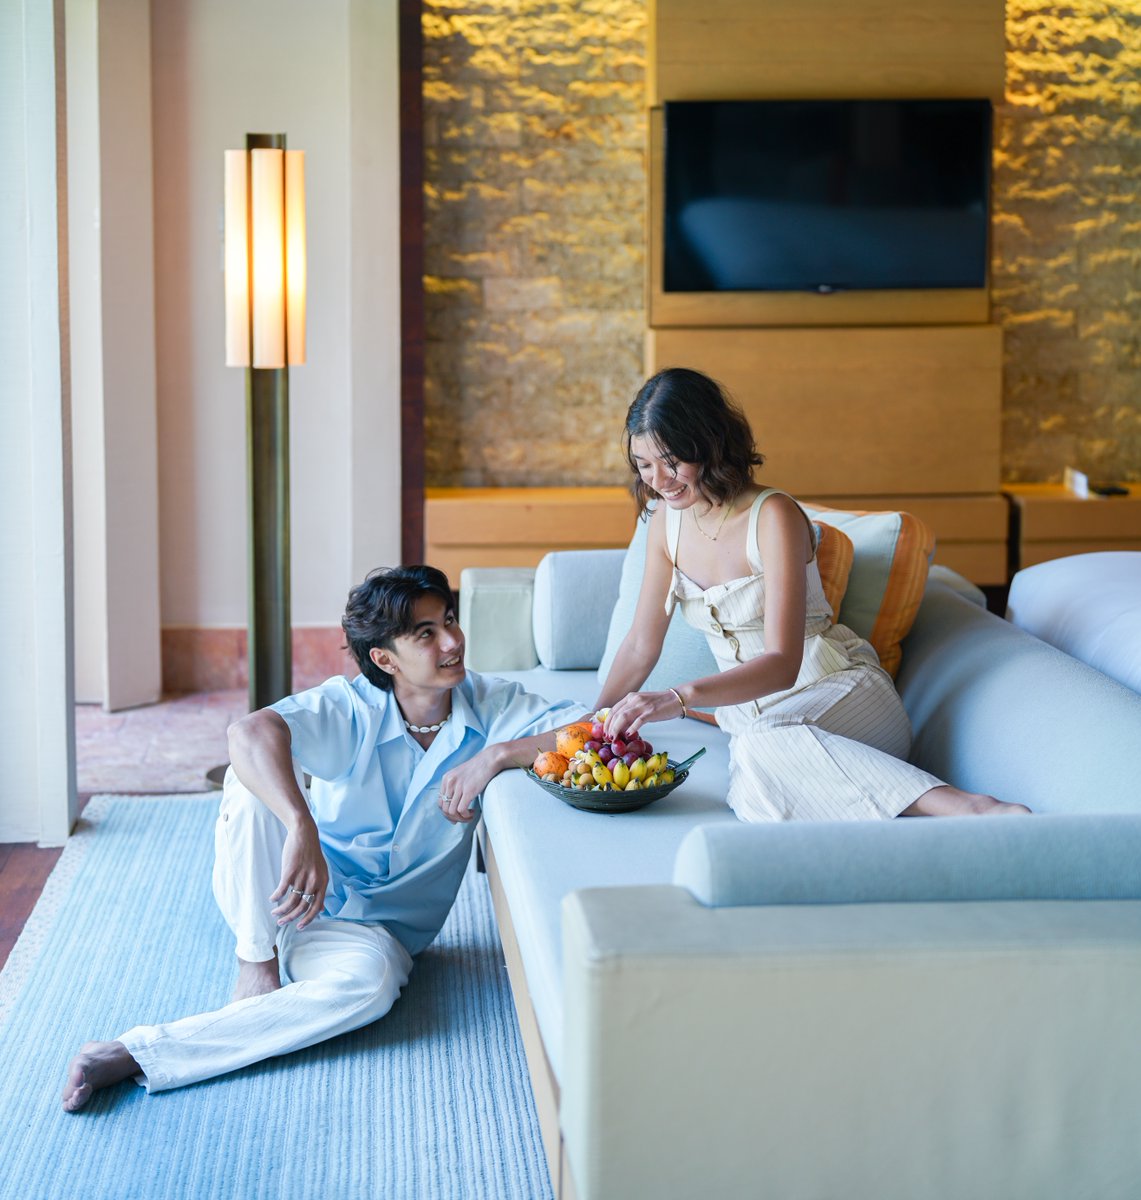 Delight in the vibrant hues and succulent flavors of tropical fruits from the comfort of your own suite.

Discover more: ritzcarltonbali.com

#RitzCarlton #RitzCarltonBali #Marriott #marriottbonvoy